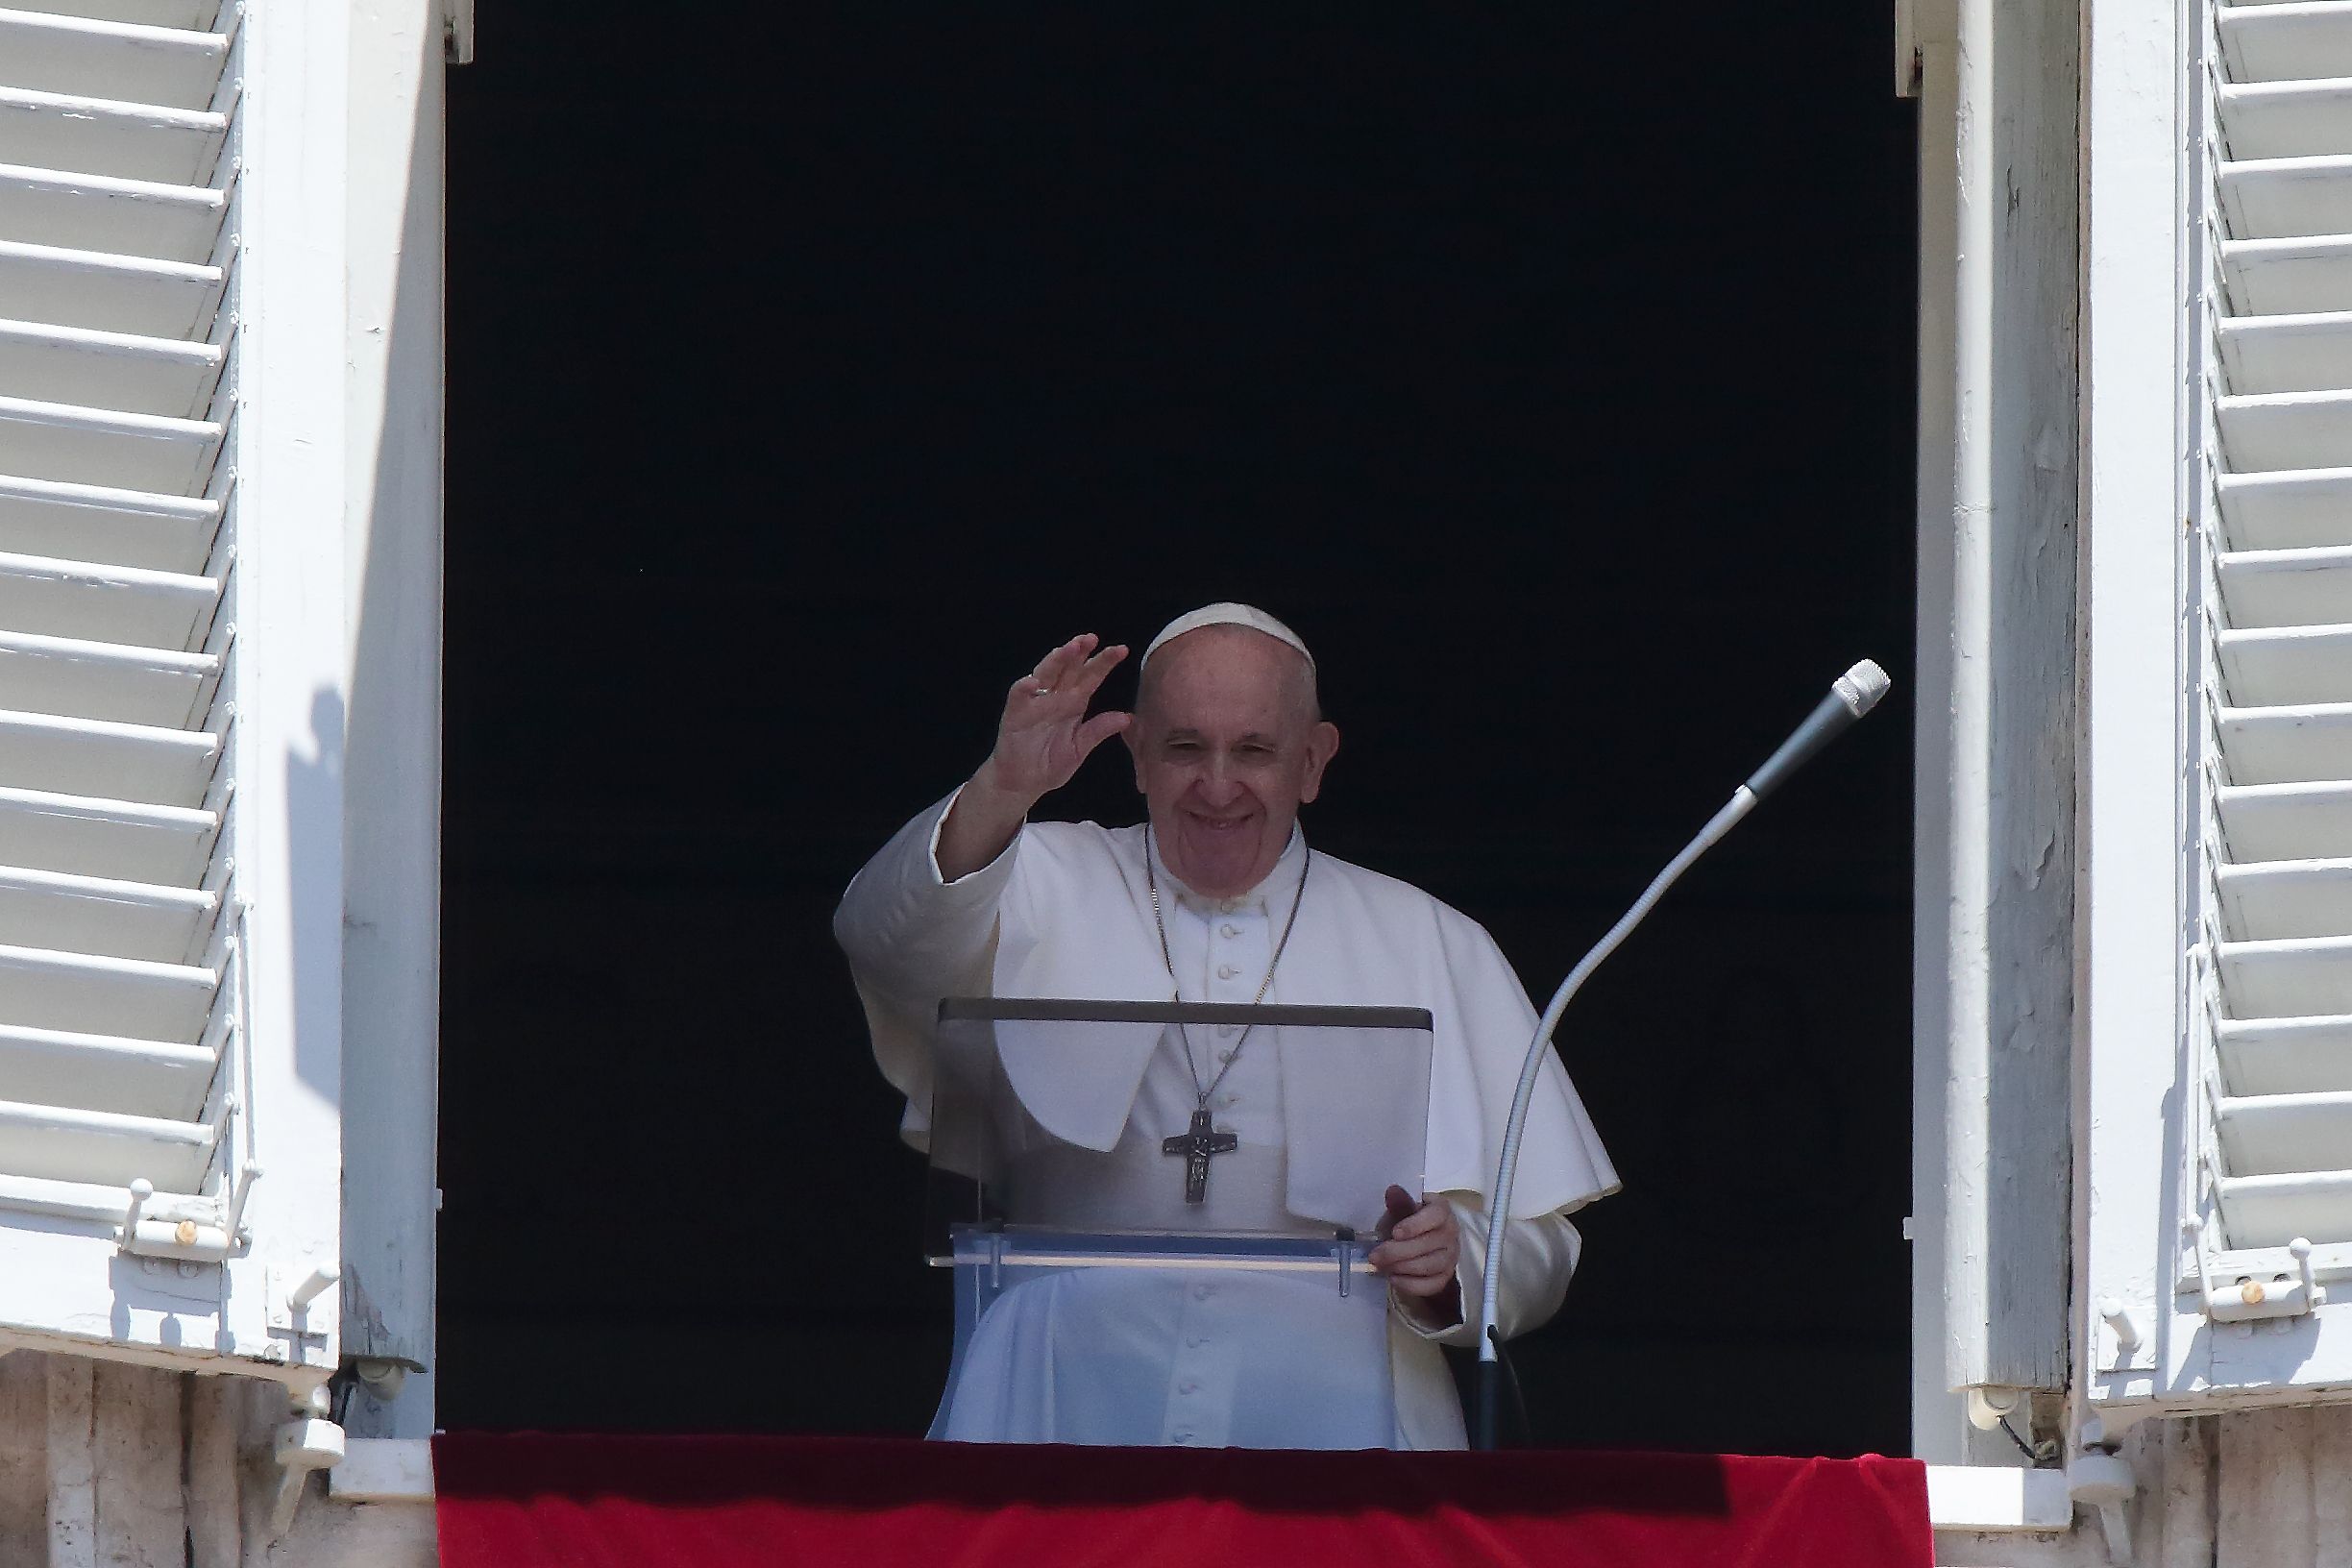 26/07/2020 26 July 2020, Vatican, Vatican City: Pope Francis delivers the Angelus prayer from his window overlooking St. Peter's Square at the Vatican. Photo: Evandro Inetti/ZUMA Wire/dpa
SOCIEDAD INTERNACIONAL
Evandro Inetti/ZUMA Wire/dpa
